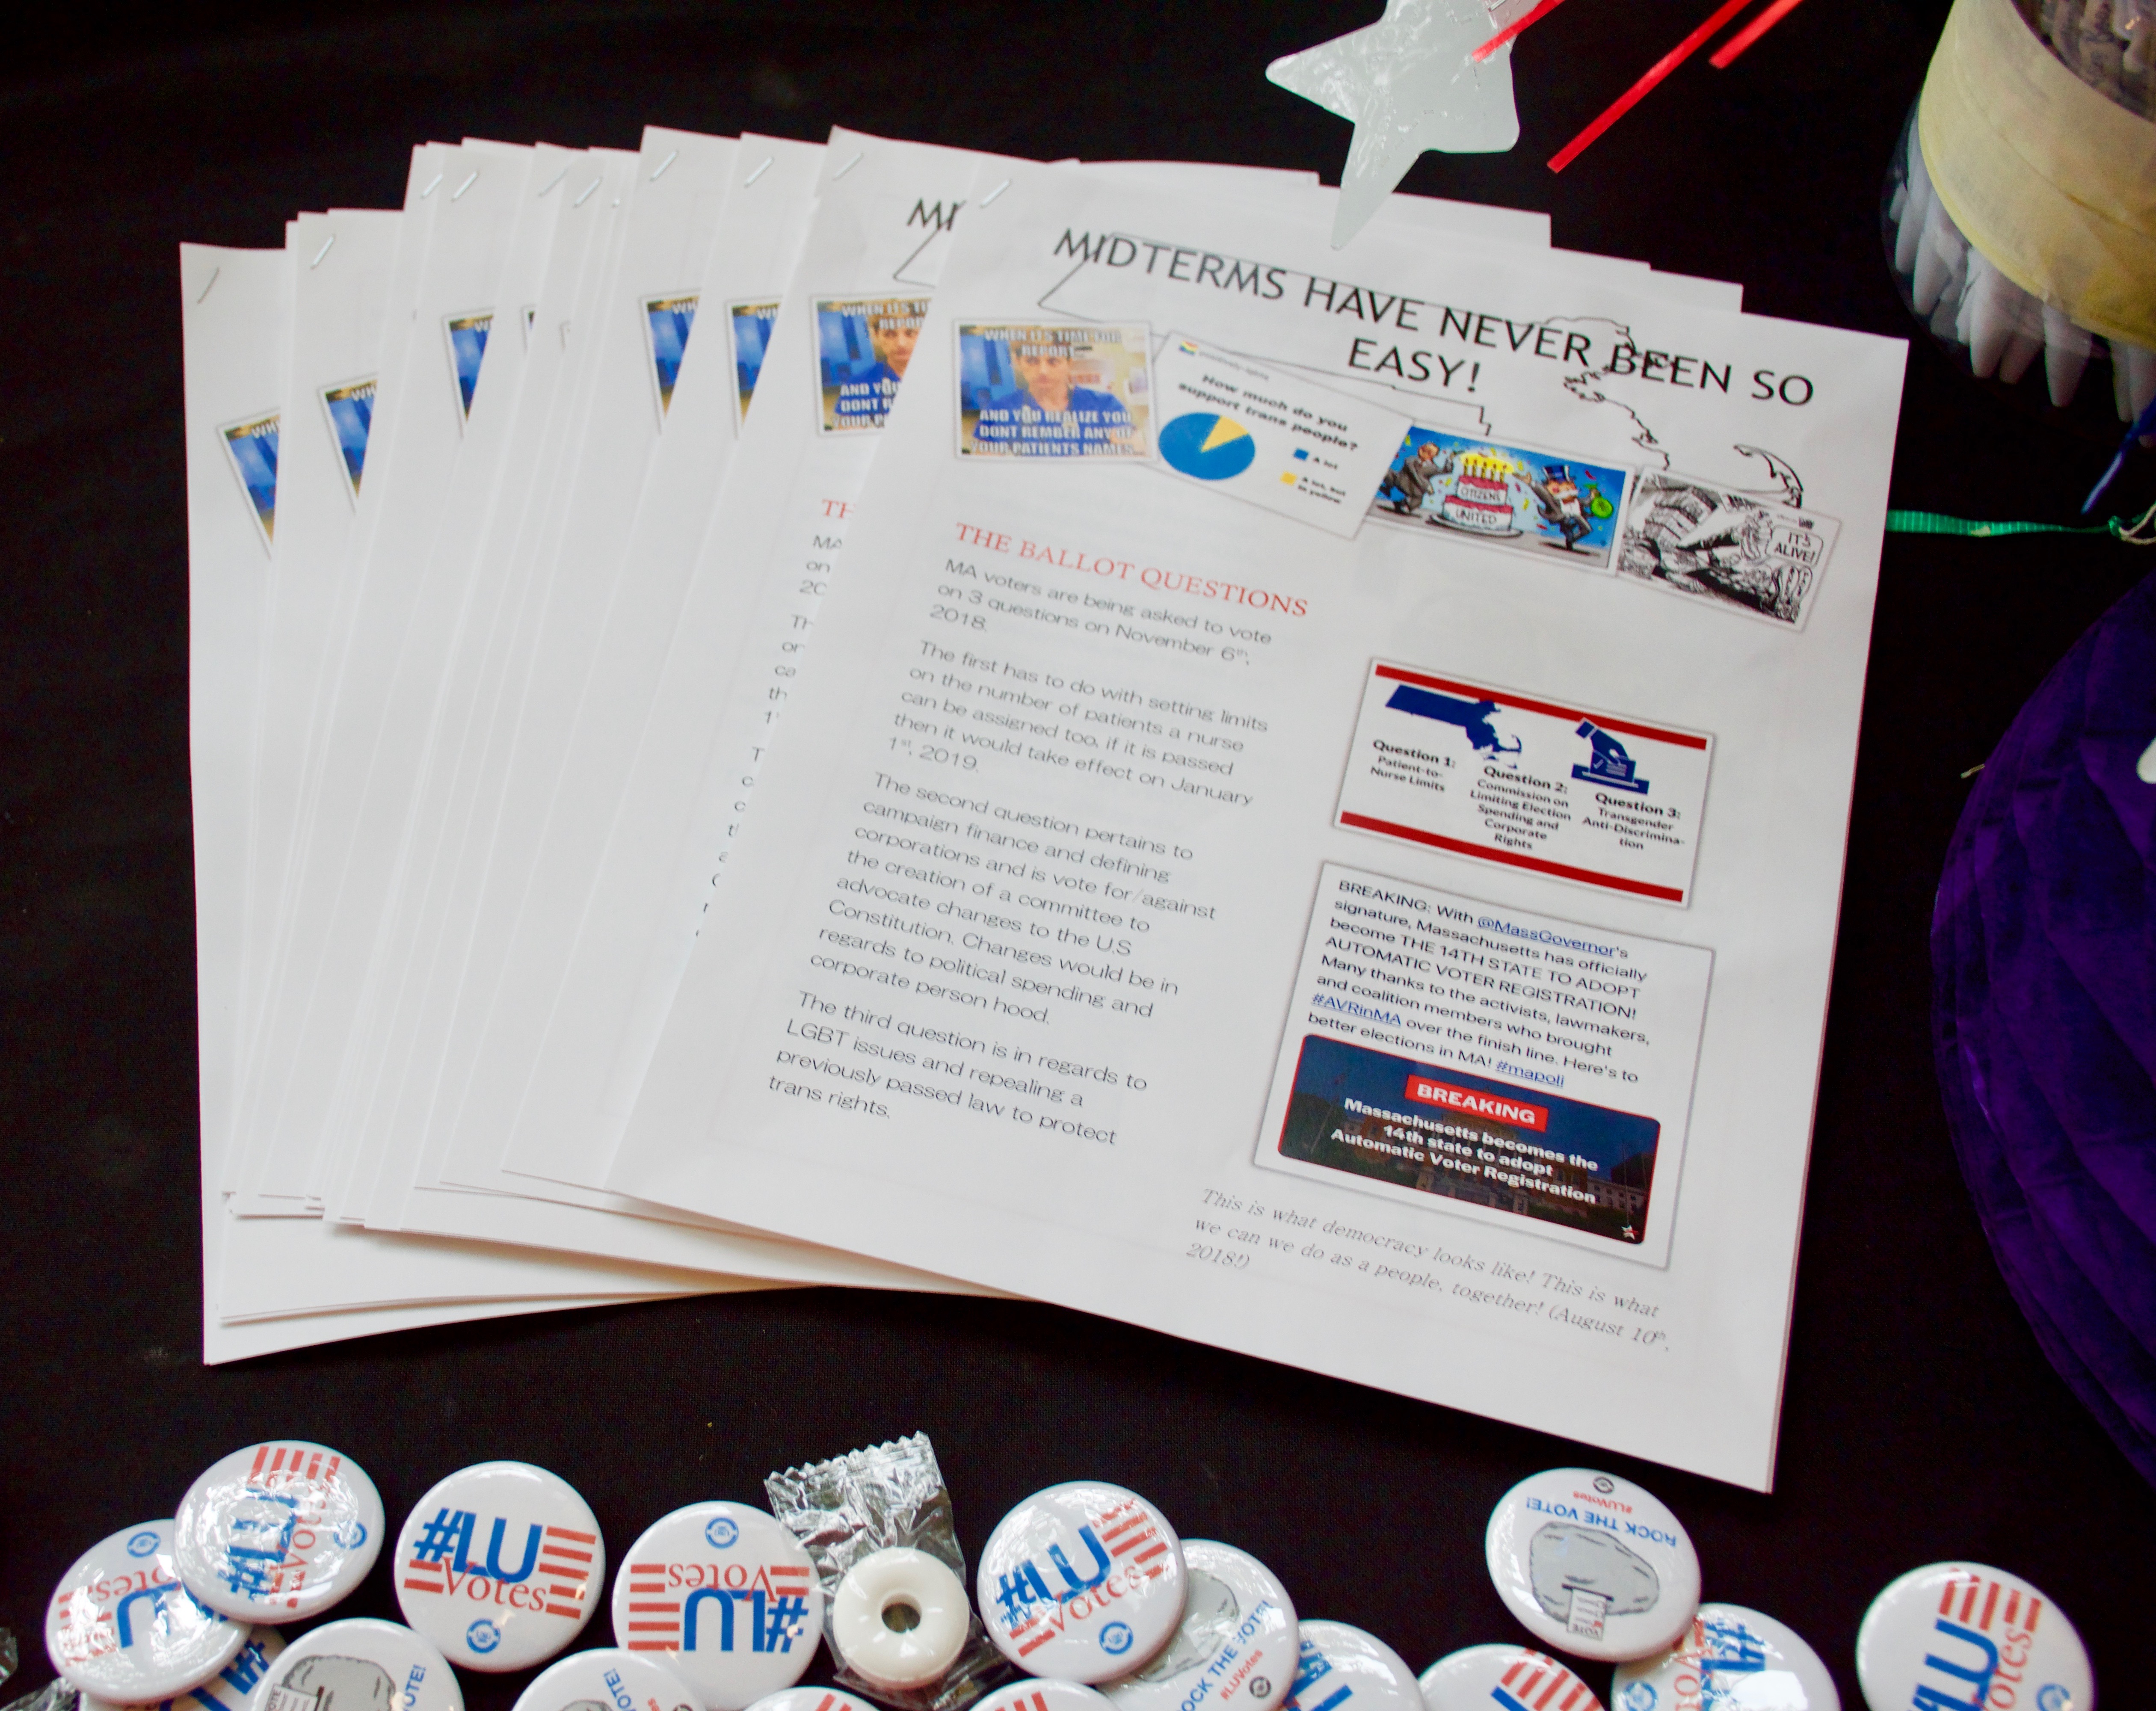 Voter registration information with fliers and buttons on a table.